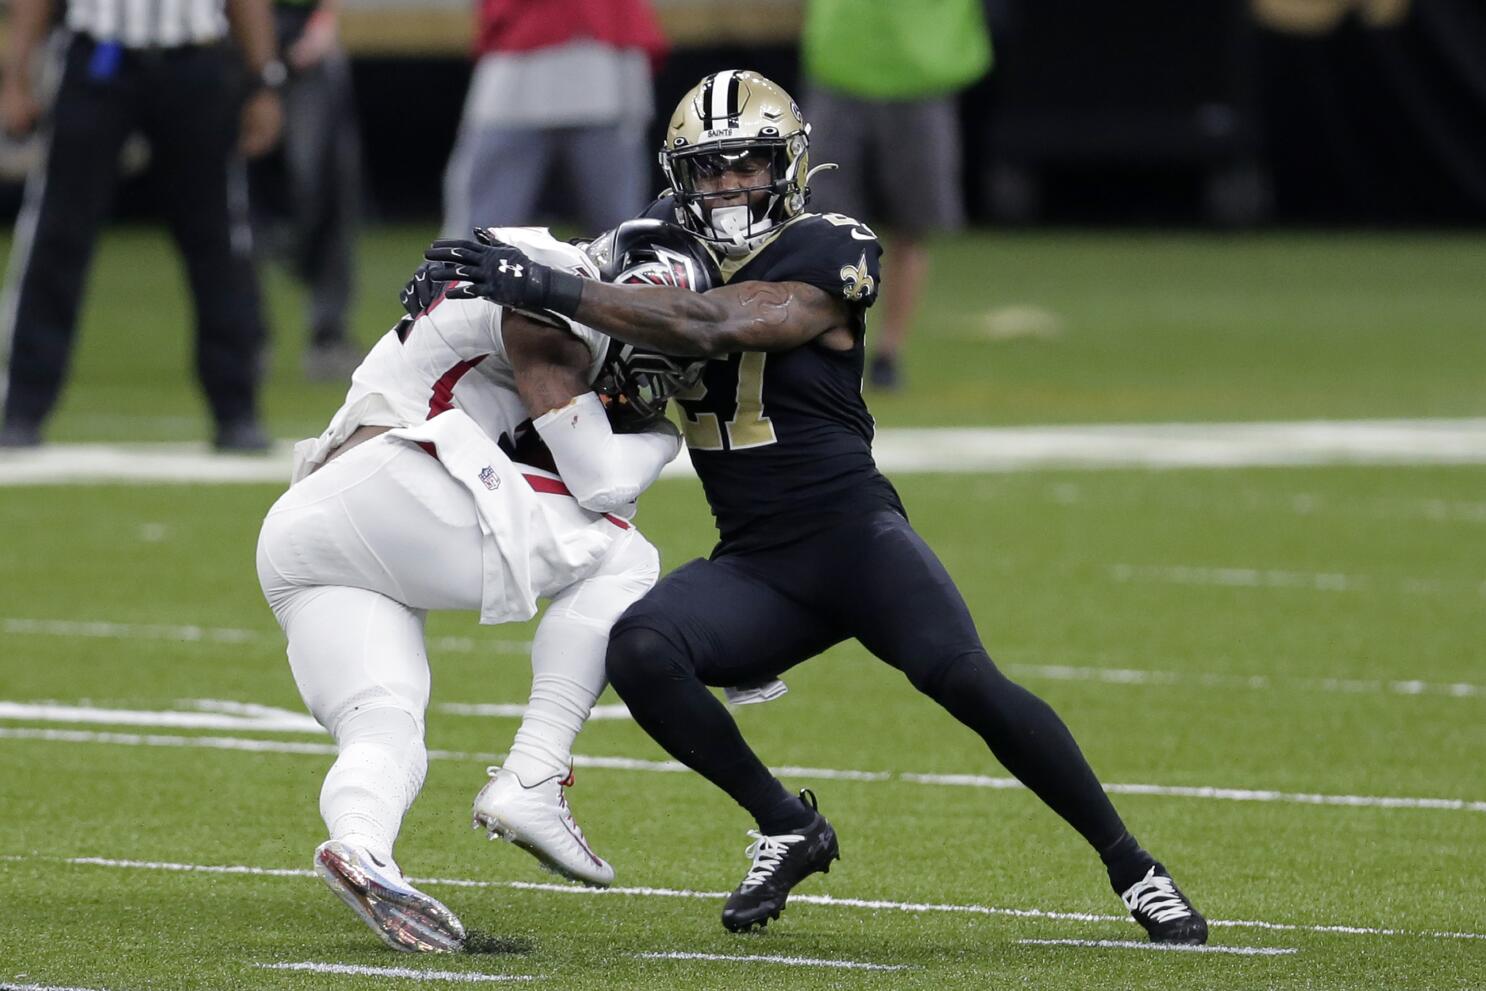 Saints safety Malcolm Jenkins helps lead team's resurgence in